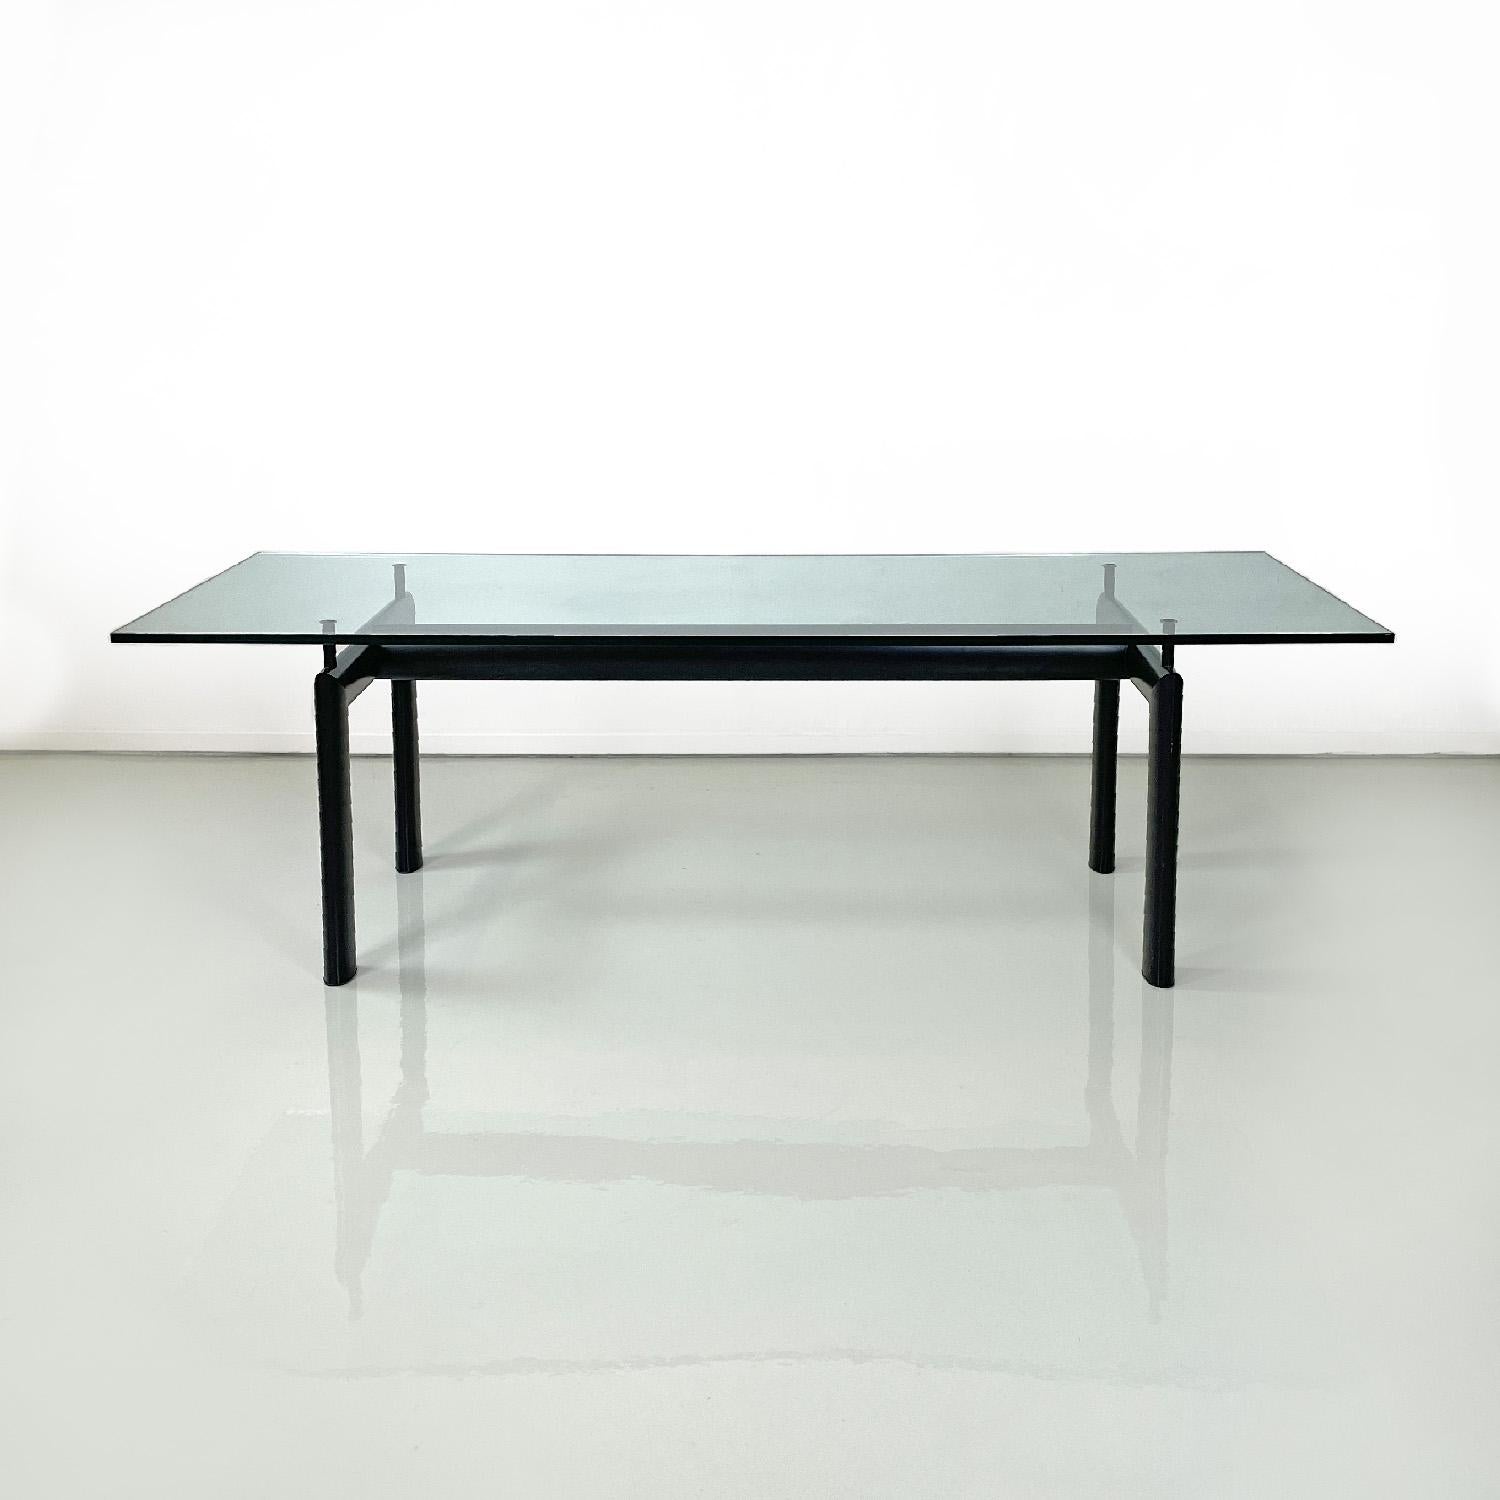 Italian table LC6 by Le Corbusier, Jeanneret and Perriand for Cassina, 1980s
Rectangular-shaped LC6 dining table with glass top and oval structure in black painted steel. The glass top has beveled corners.
Produced by Cassina in 1980s and designed